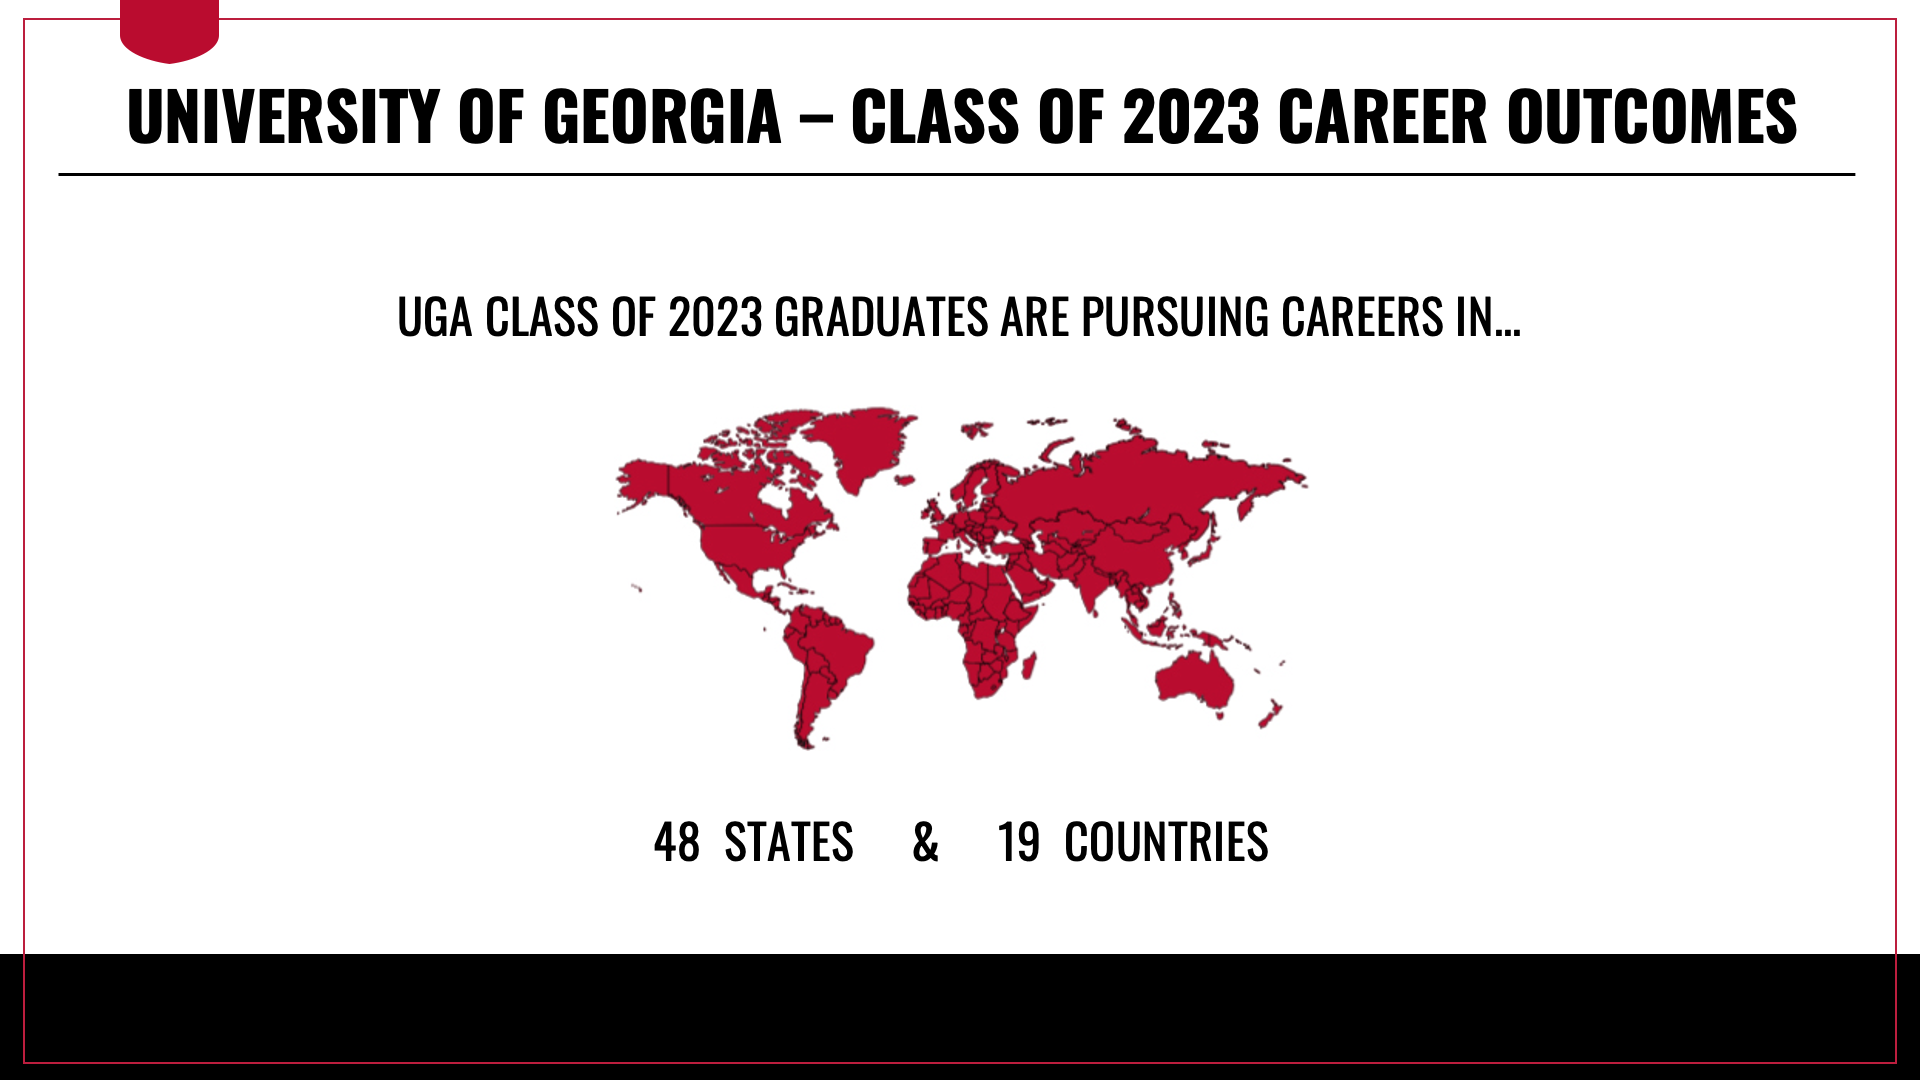 UGA CLASS OF 2023 GRADUATES ARE PURSUING CAREERS IN 48 STATES AND 19 COUNTRIES